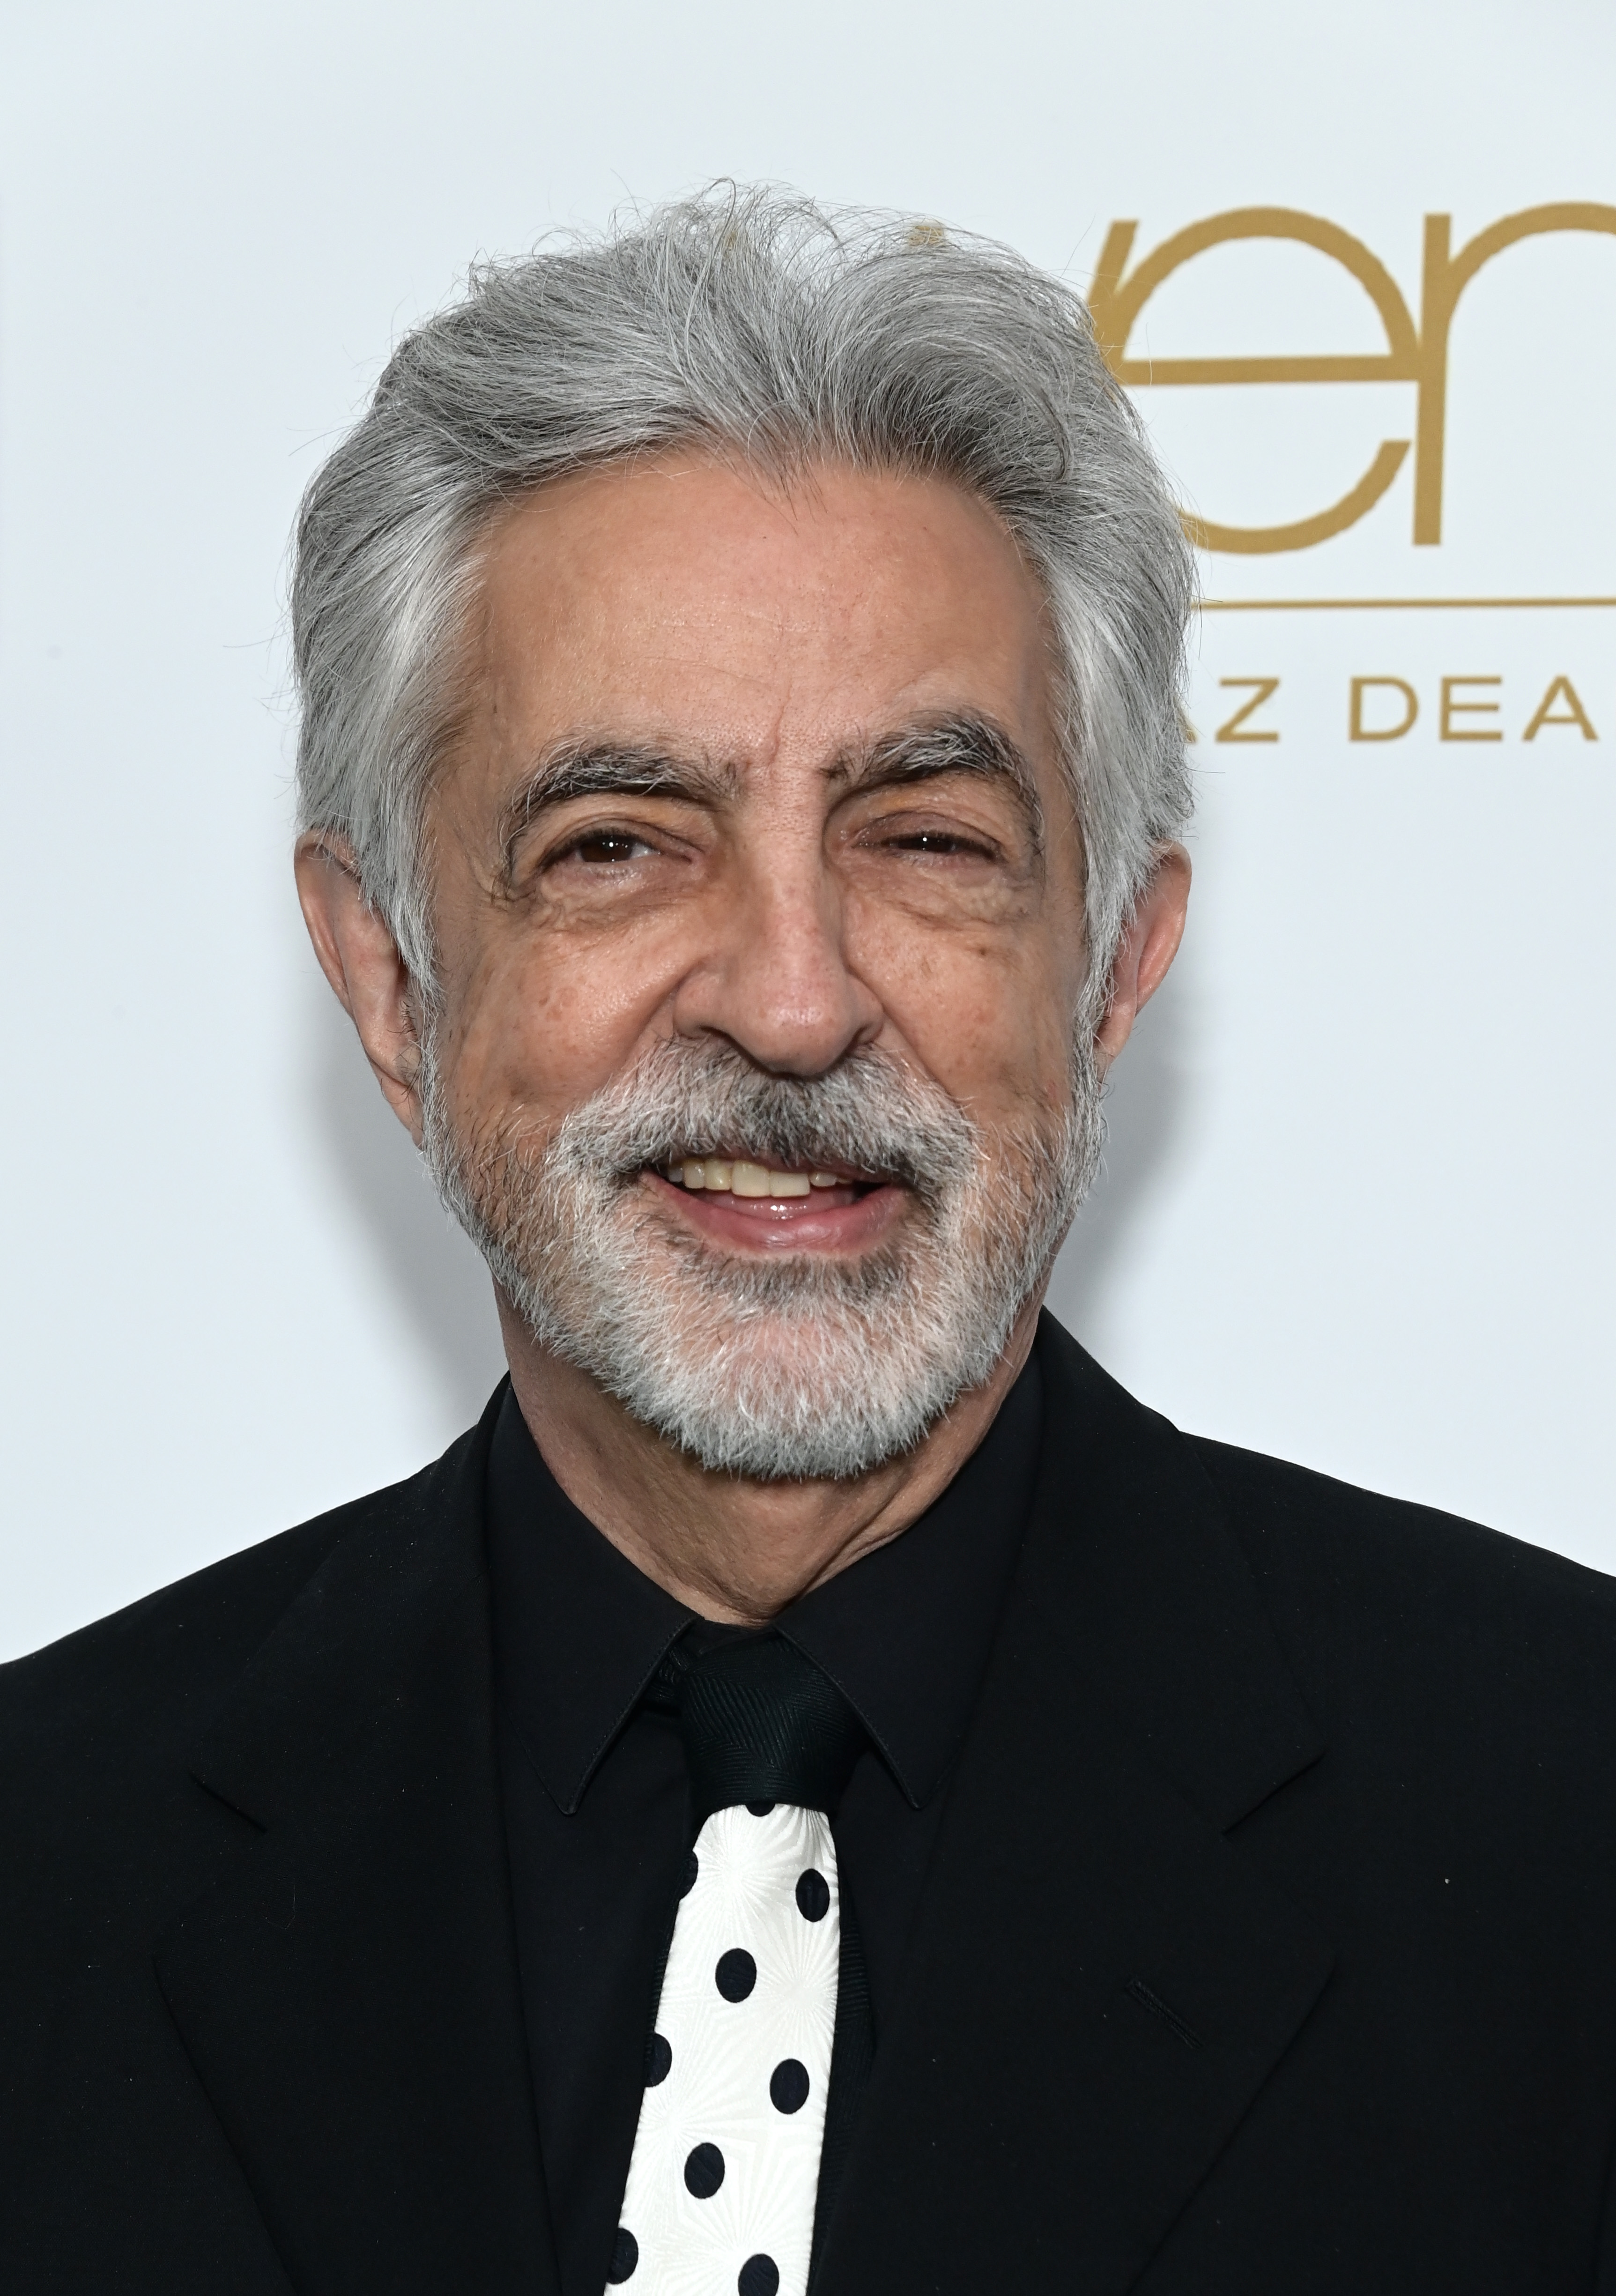 Joe Mantegna at the 8th Annual Hollywood Beauty Awards in Los Angeles, California on March 9, 2023 | Source: Getty Images